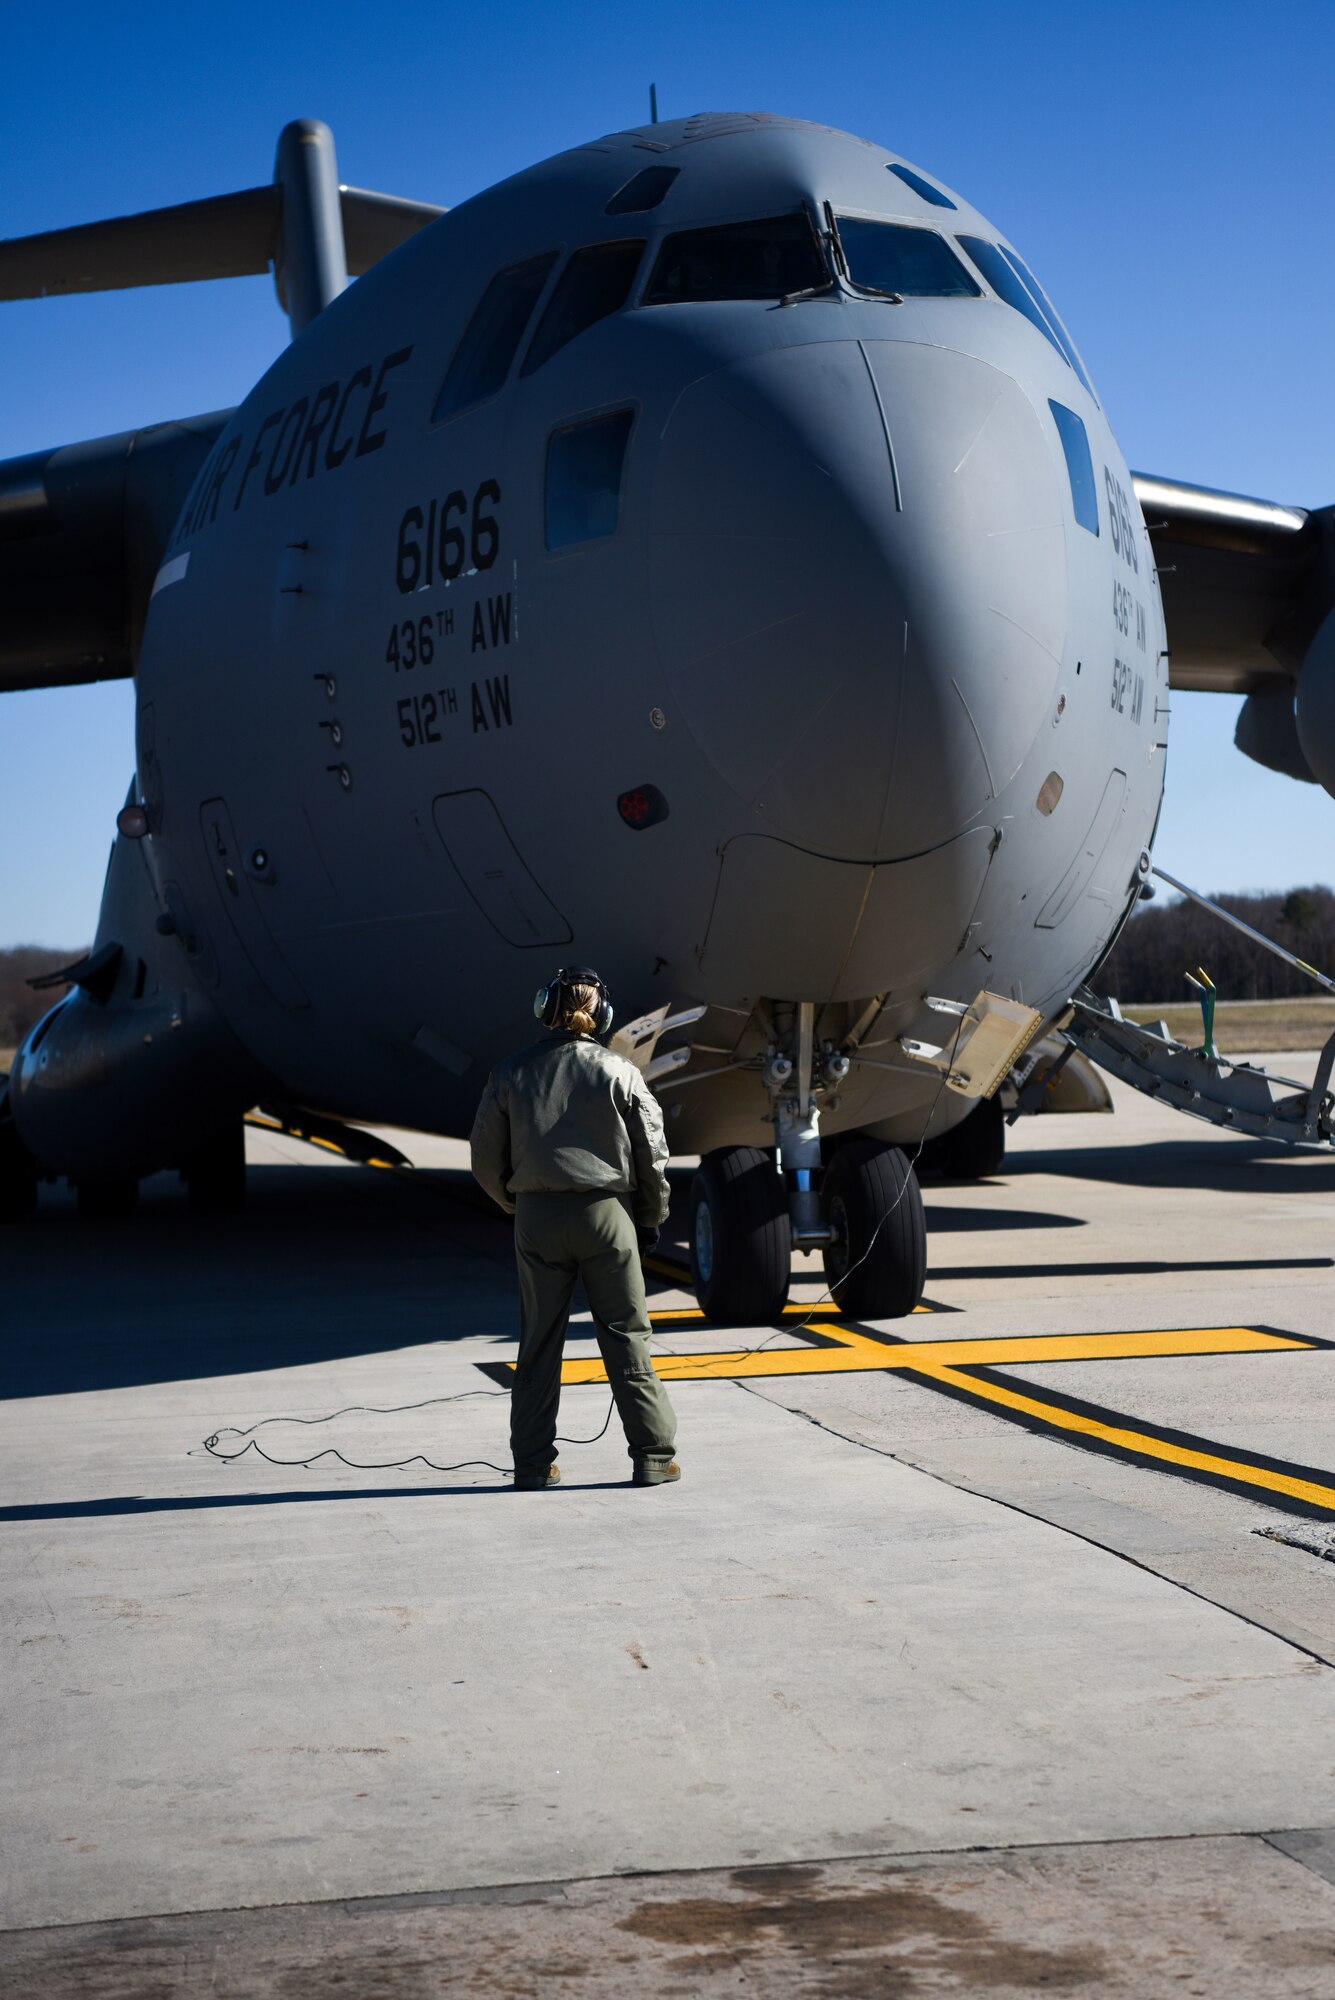 Senior Master Sgt. Lori Tascione, 3rd Airlift Squadron superintendent, scans a C-17 Globemaster III for engine start March 5, 2018, at Dover Air Force Base, Del. Tascione joined an all-female crew to fly the final flight of her career. (U.S. Air Force Photo by Airman 1st Class Zoe M. Wockenfuss)